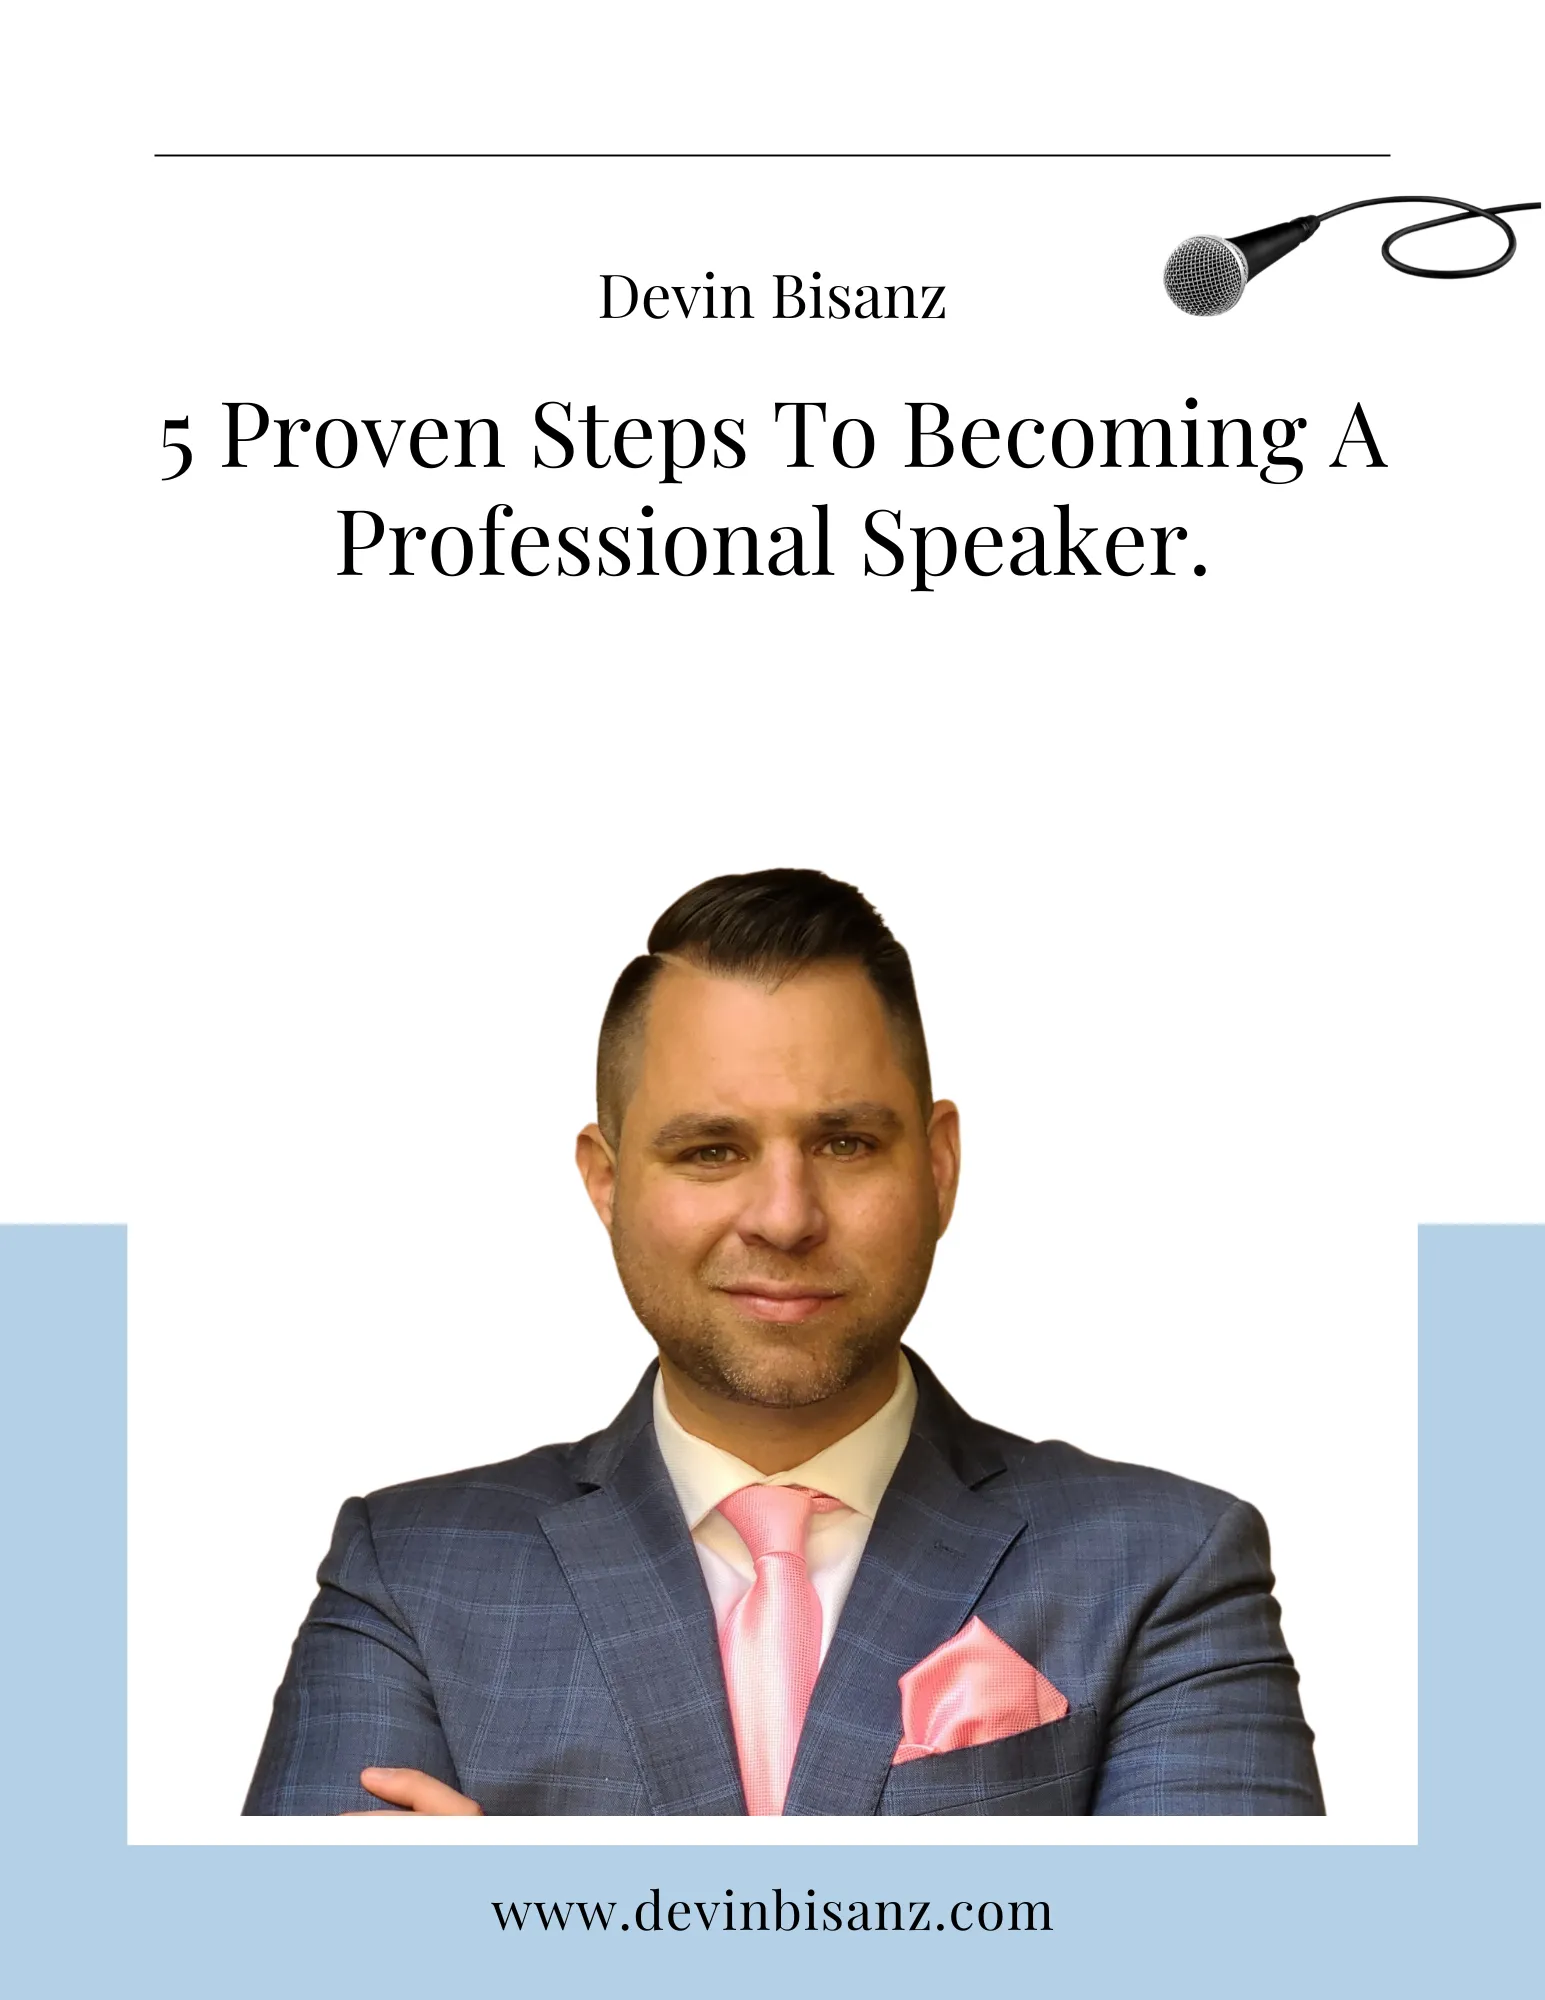 5 proven steps to becomming a profssional speaker